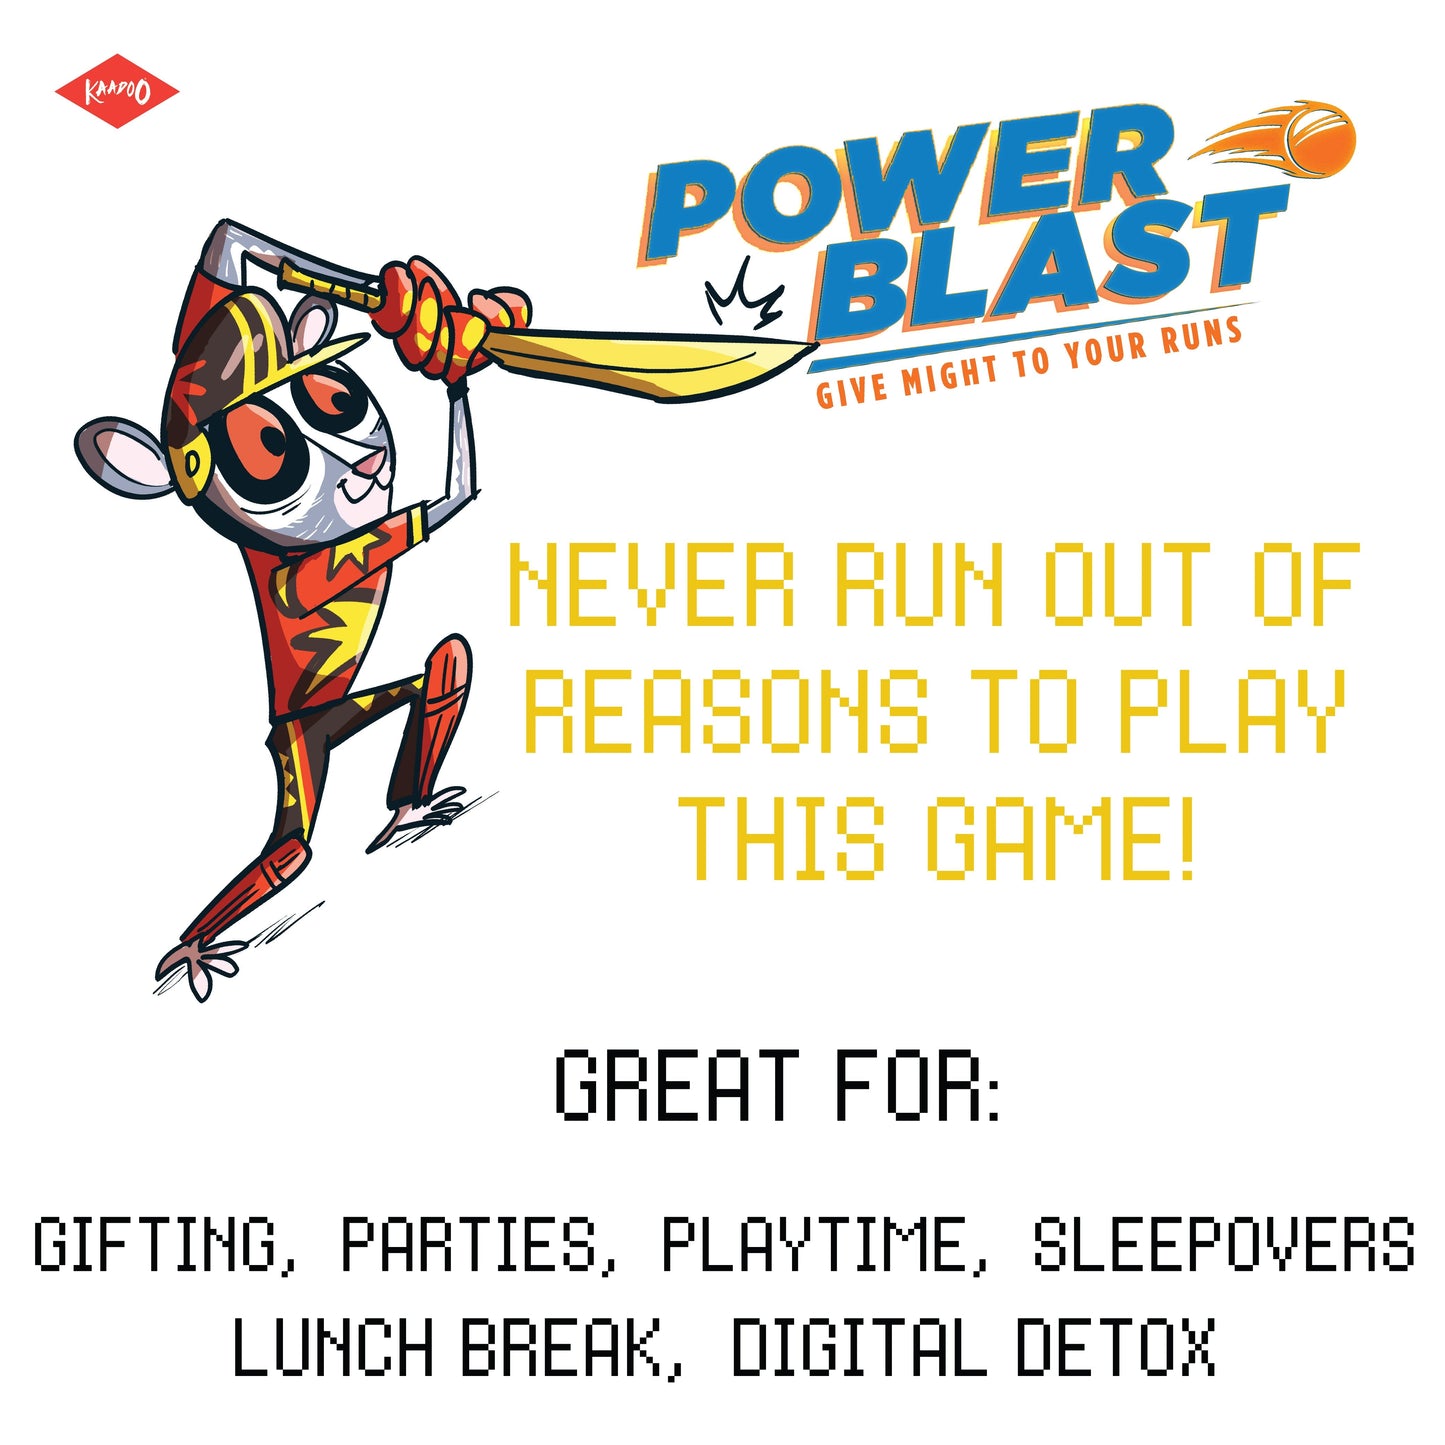 POWER BLAST Card Game – Give Might to Your Runs (Pack of 10)